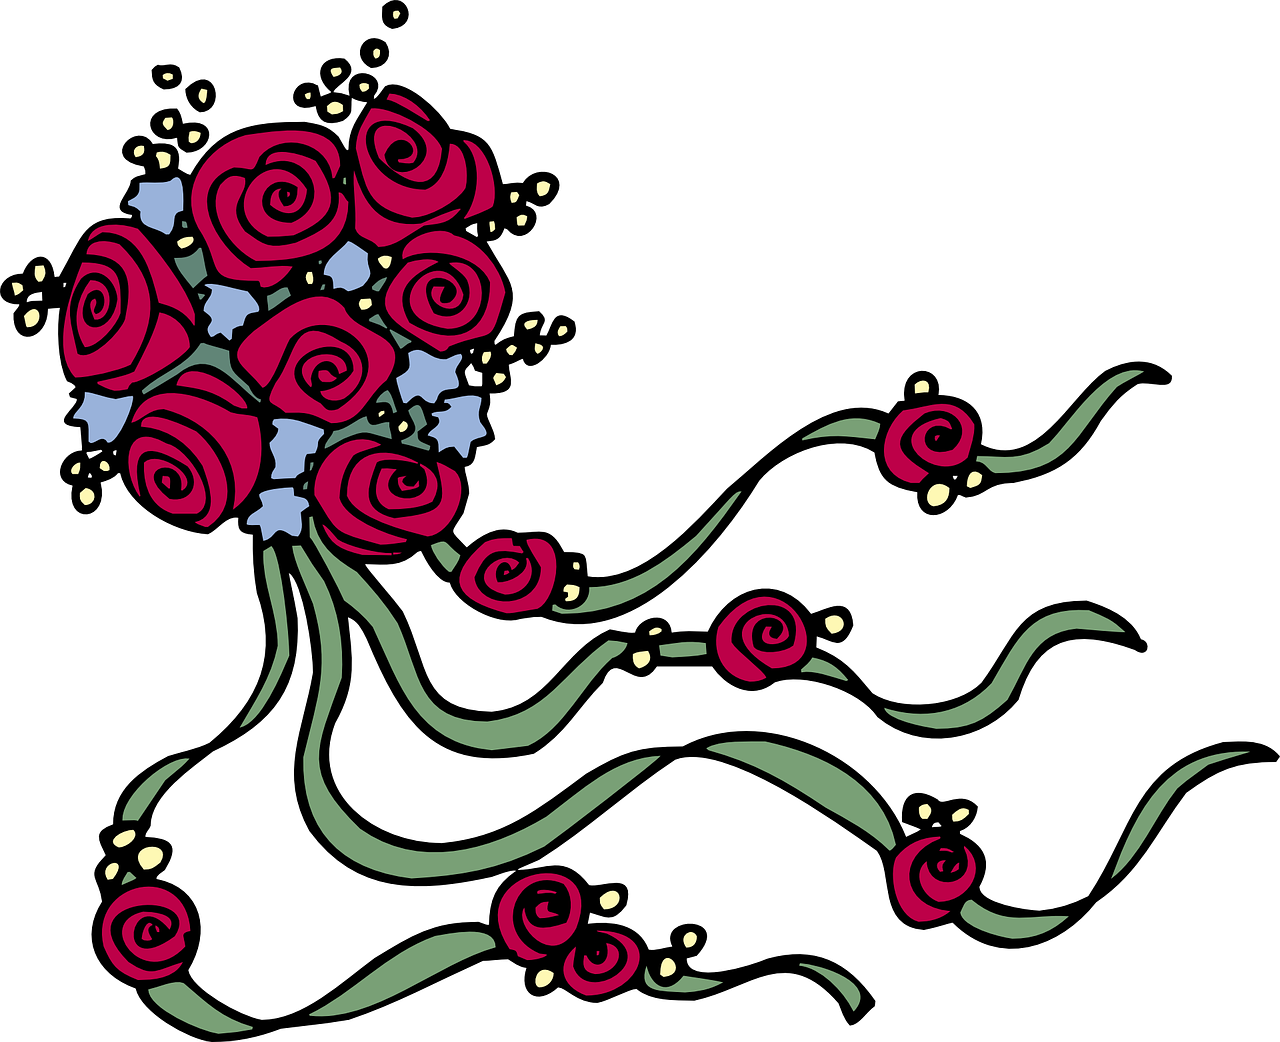 a bouquet of red roses on a black background, inspired by Georges Lacombe, deviantart, art nouveau, art nouveau curves and swirls, right side composition, loosely cropped, illustrated in whimsical style